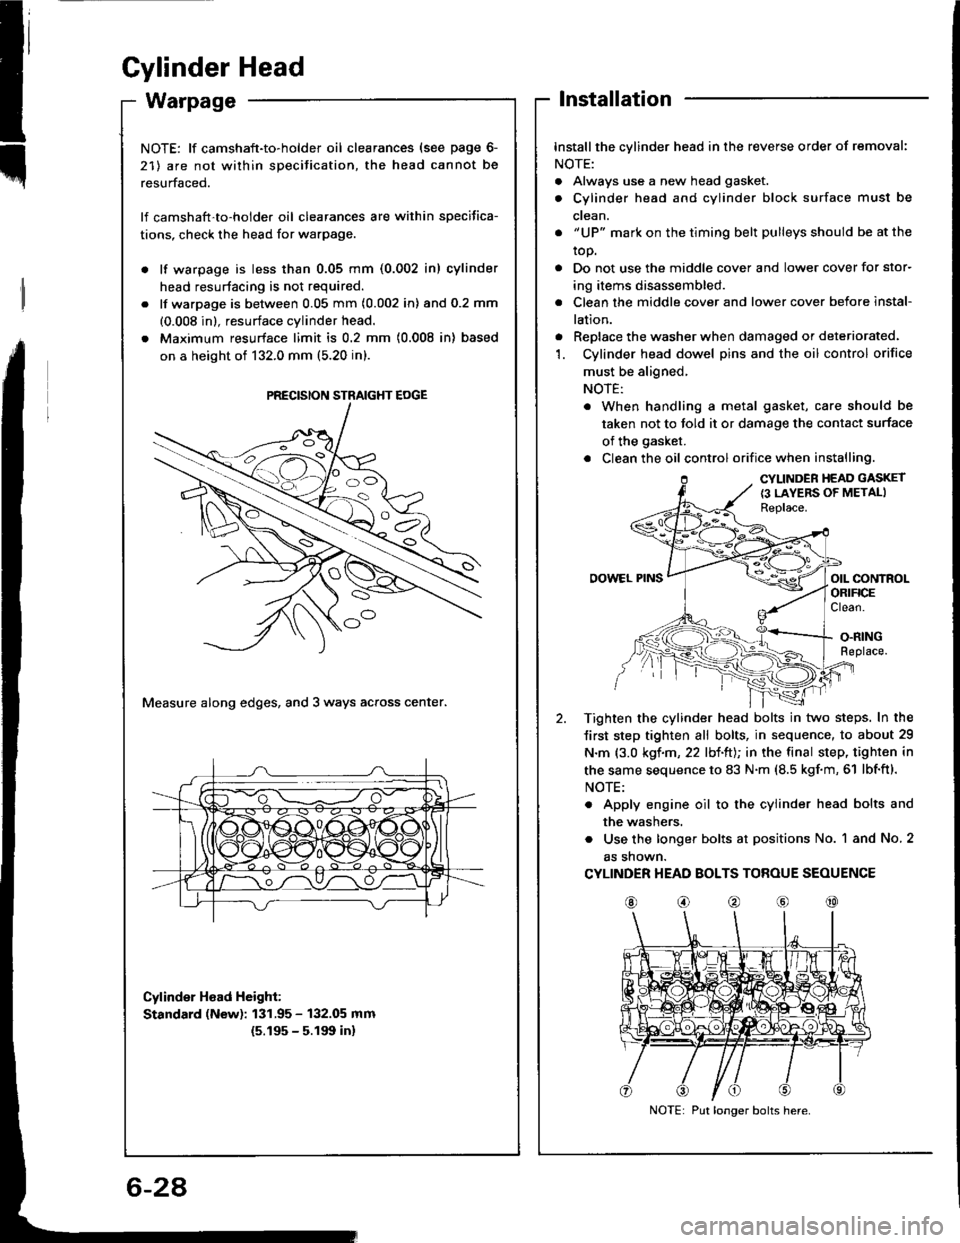 ACURA INTEGRA 1994  Service Repair Manual t
Gylinder Head
Installation
Installthe cylinder head in the reverse order of removal:
NOTE:
. Always use a new head gasket.
. Cylinder head and cylinder block surface must be
ctean.
. "UP" mark on th